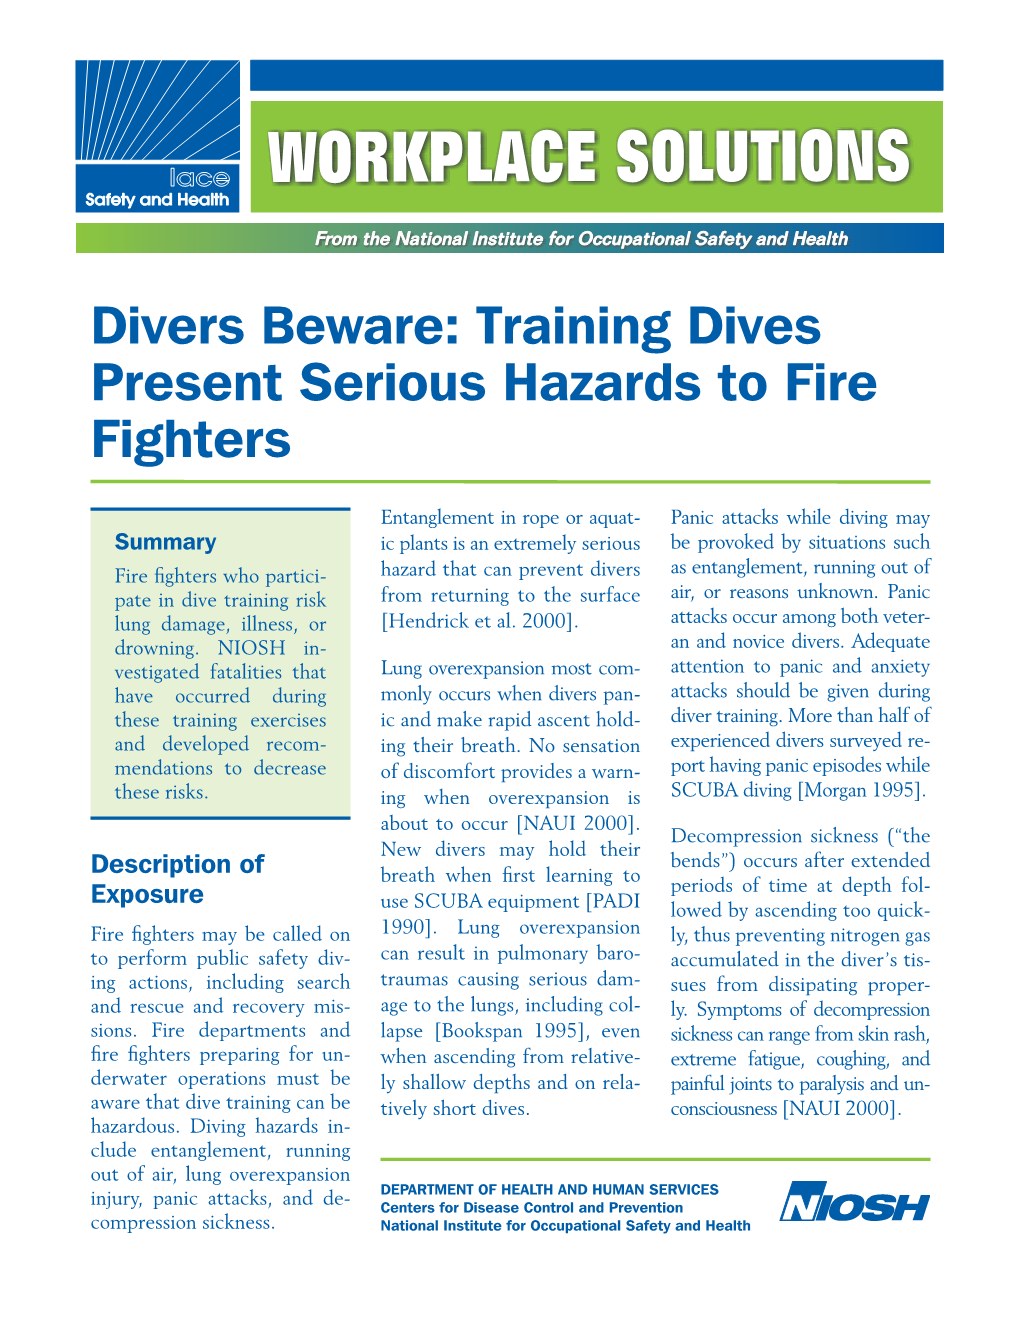 Training Dives Present Serious Hazards to Fire Fighters